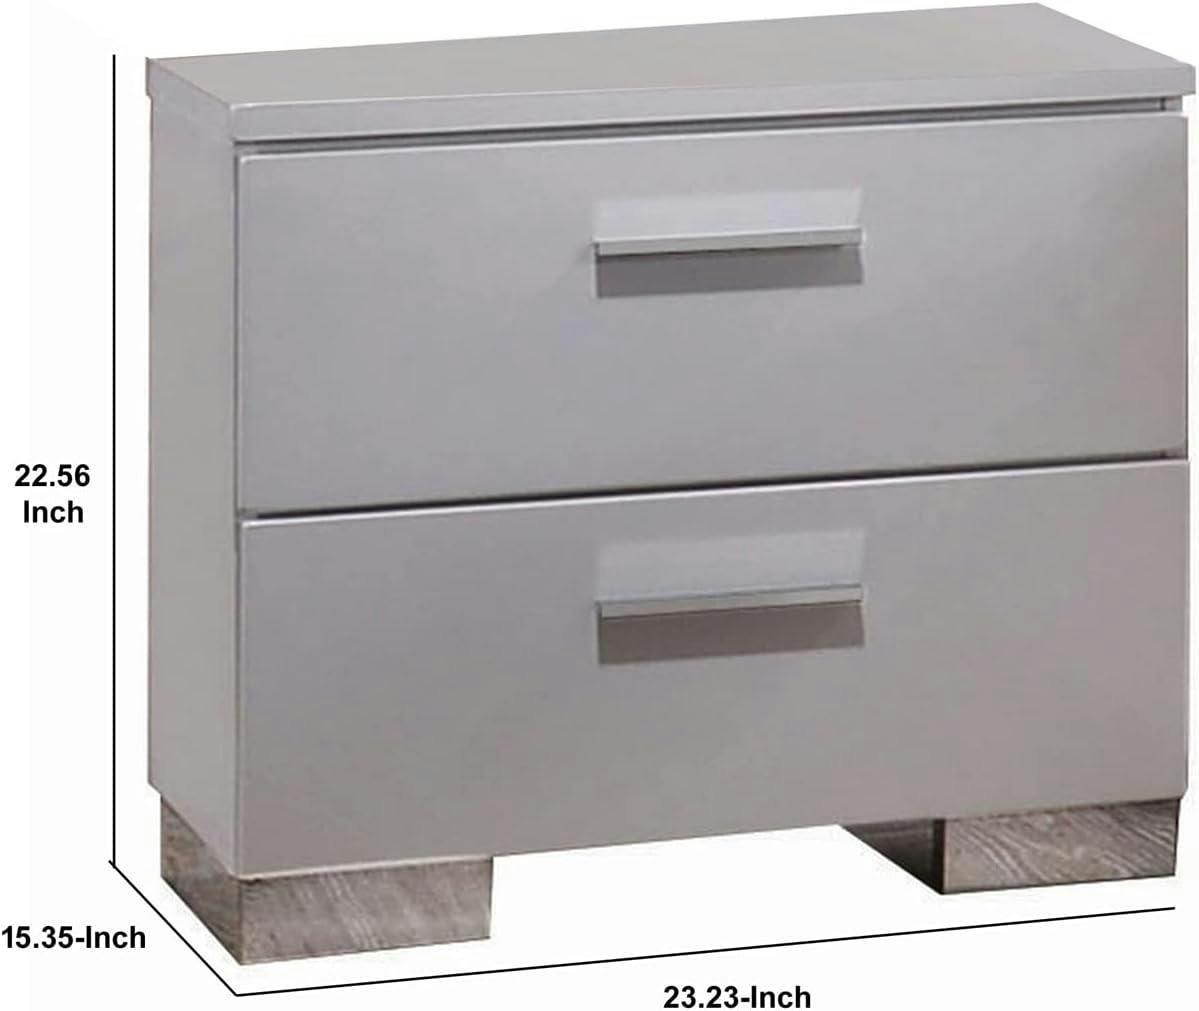 Lorimar Chic Contemporary 2-Drawer White Nightstand with Chrome Accents